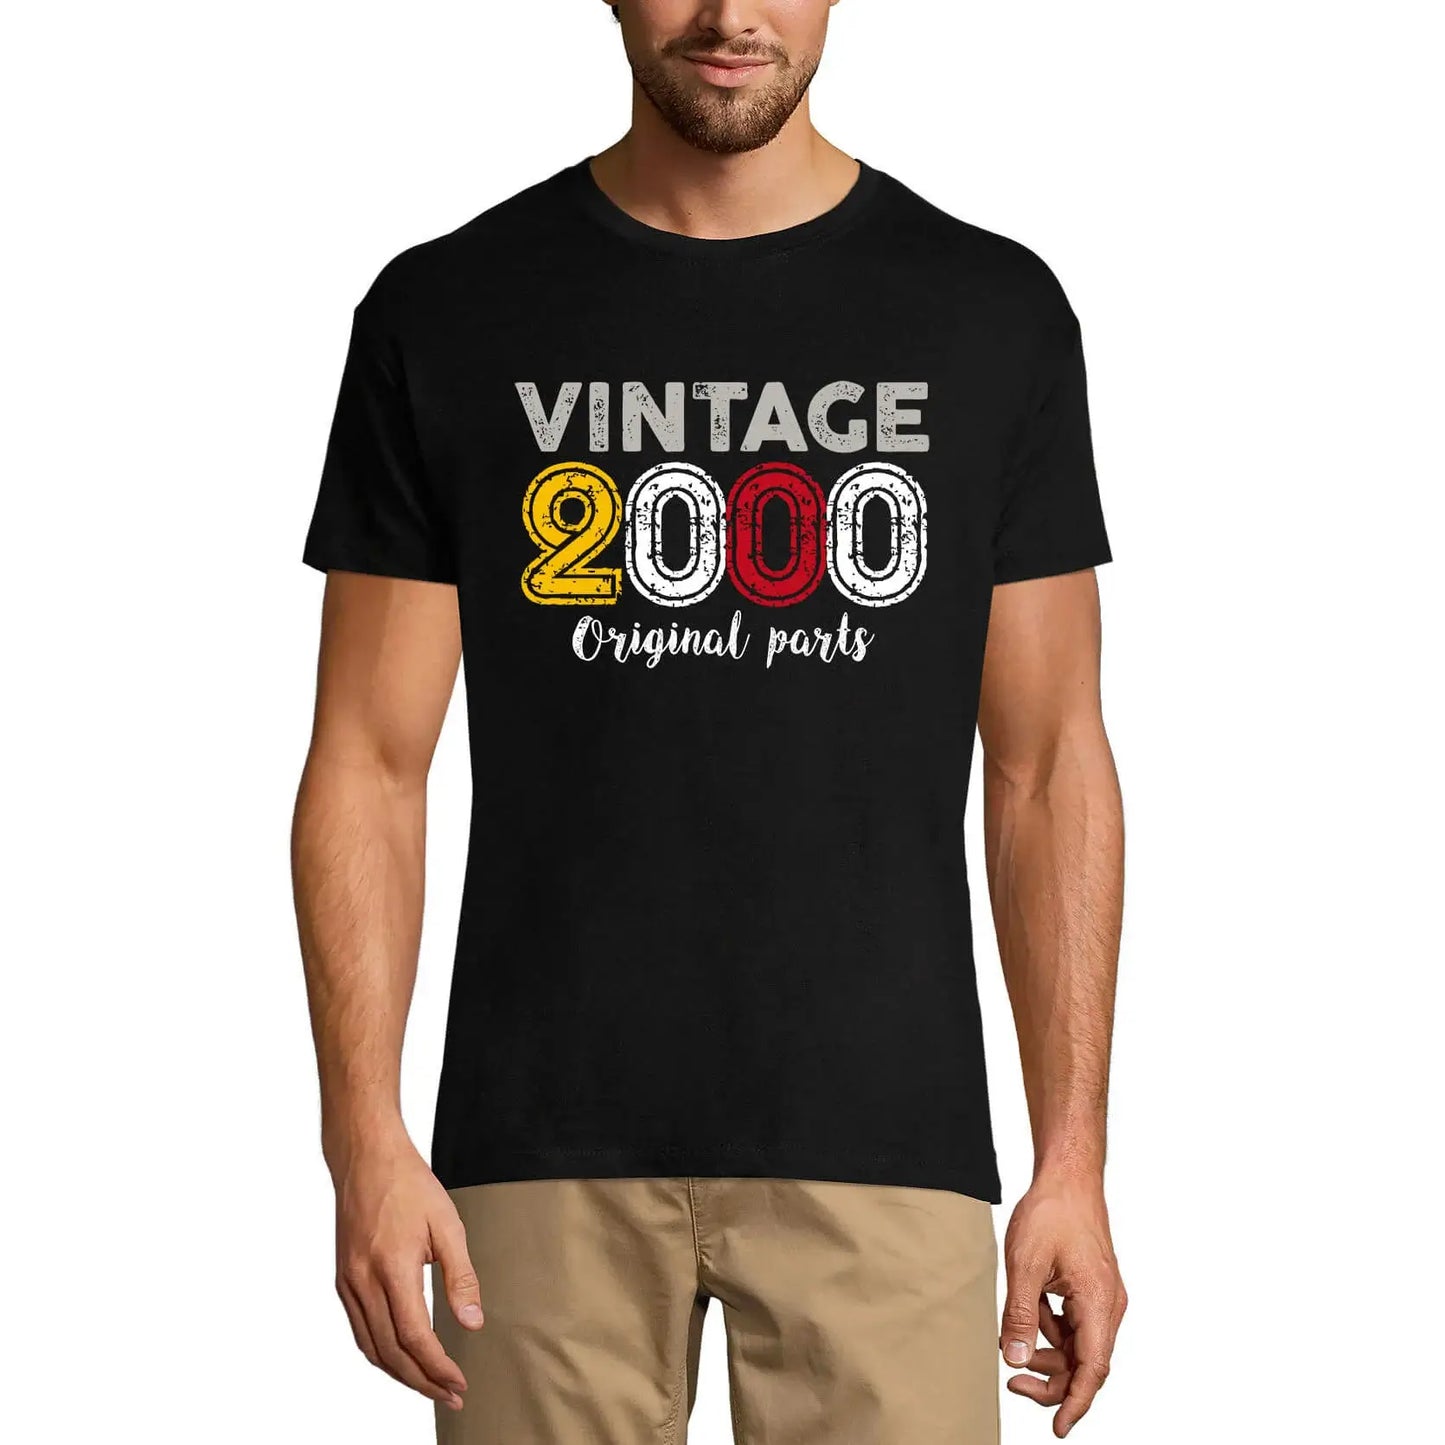 Men's Graphic T-Shirt Original Parts 2000 24th Birthday Anniversary 24 Year Old Gift 2000 Vintage Eco-Friendly Short Sleeve Novelty Tee